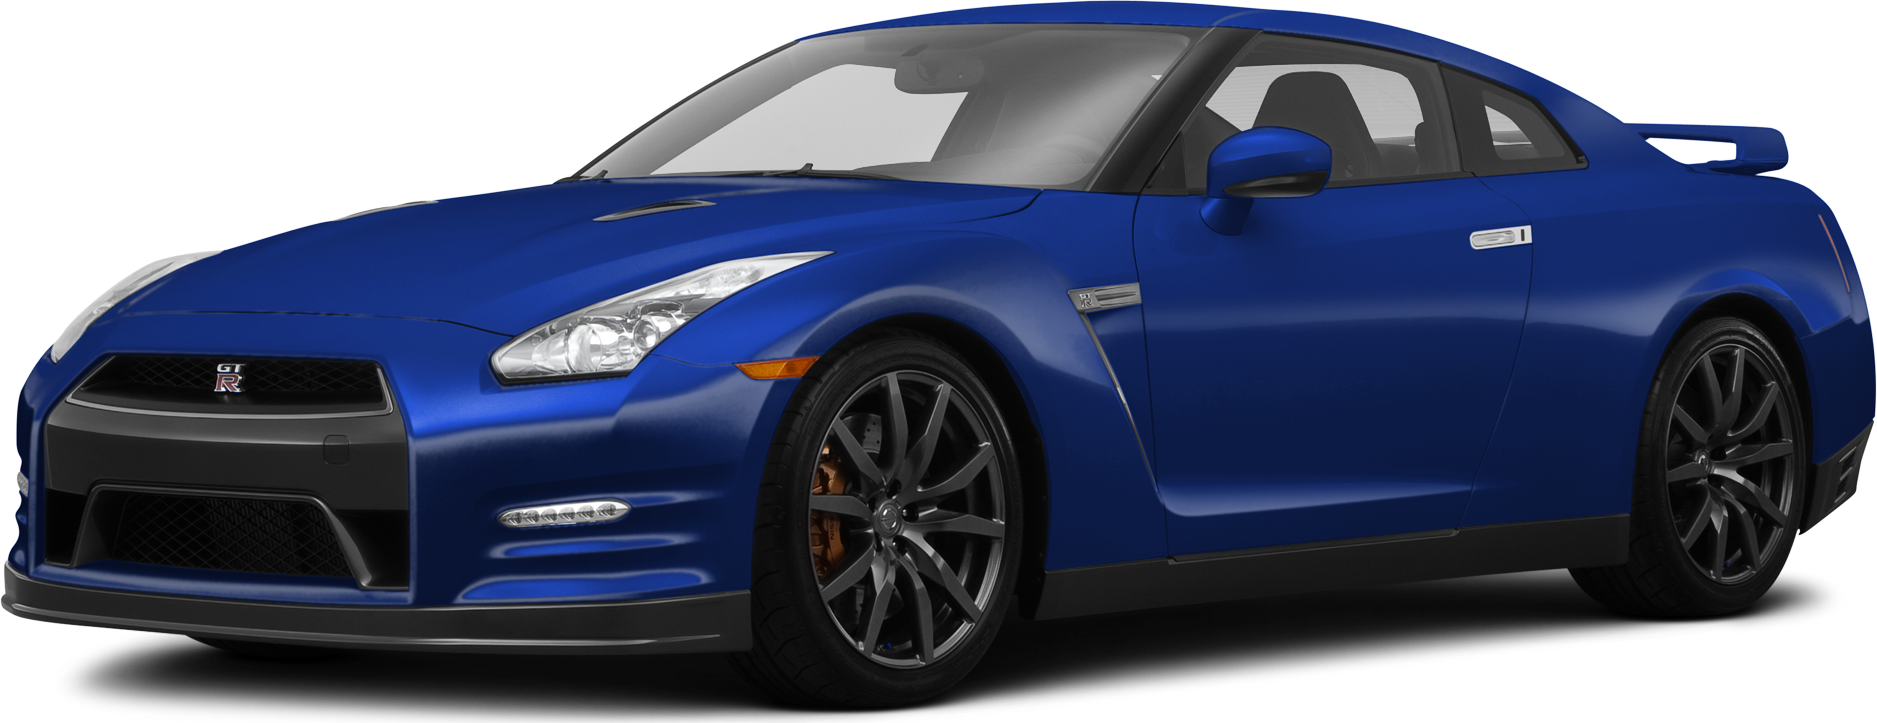 14 Nissan Gt R Values Cars For Sale Kelley Blue Book